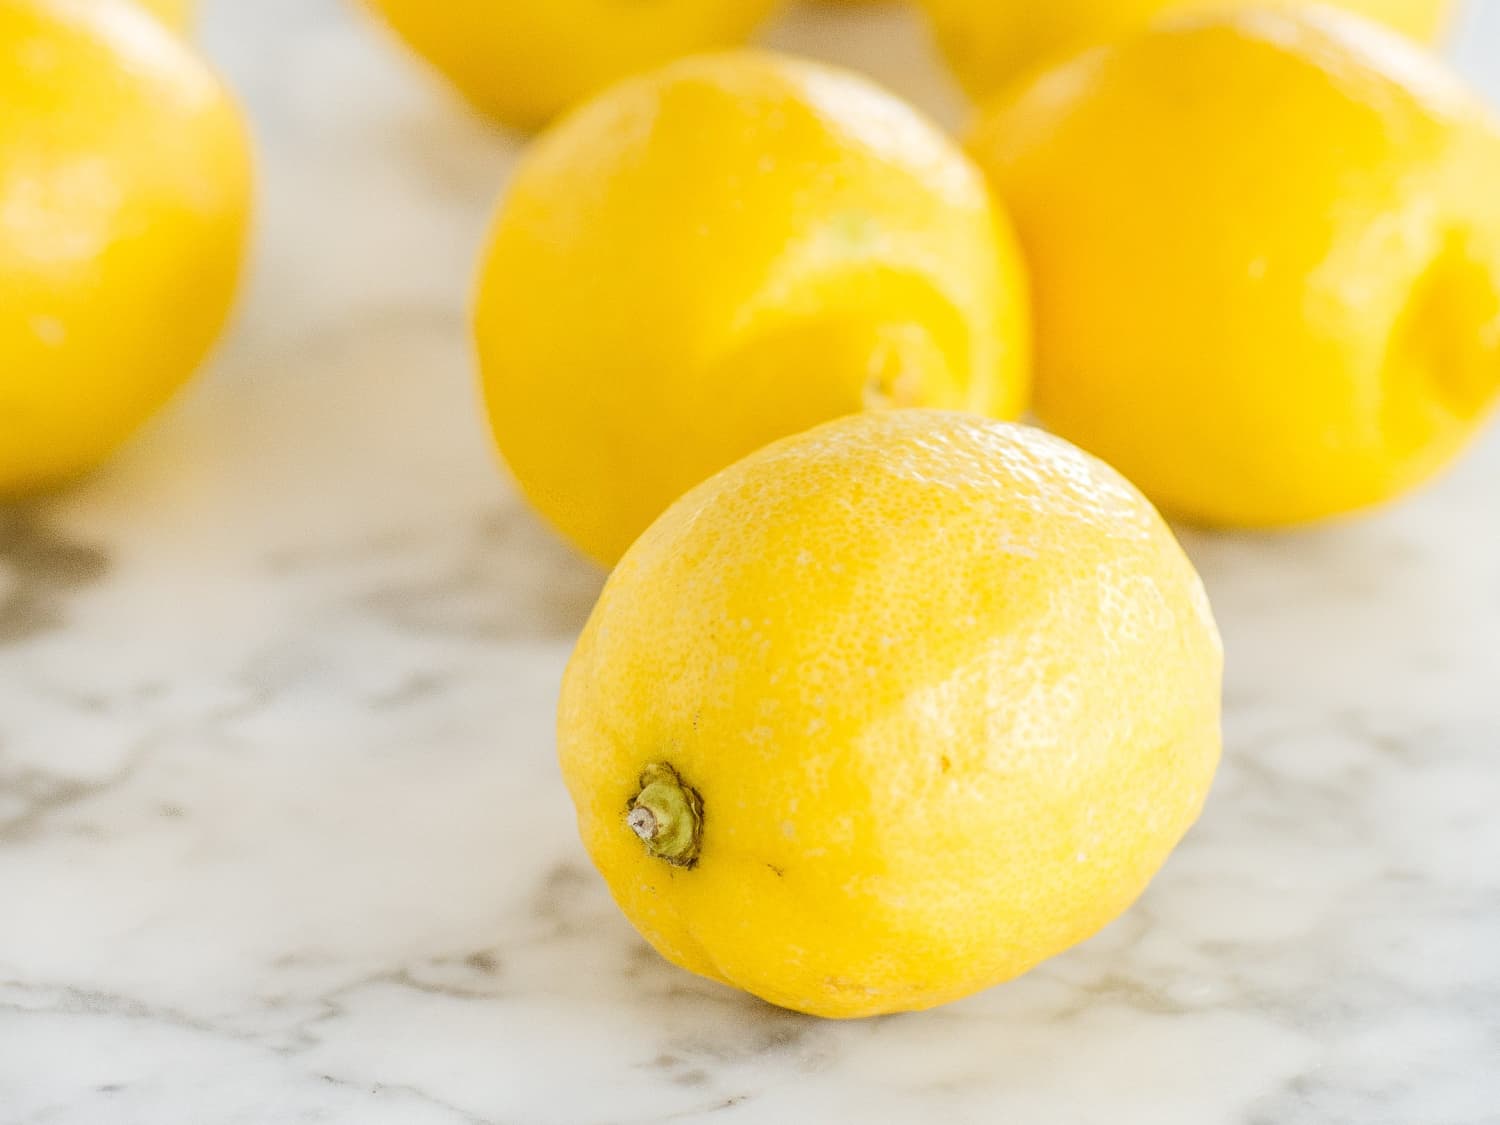 How to Store Lemons To Keep Them Fresh For a Month